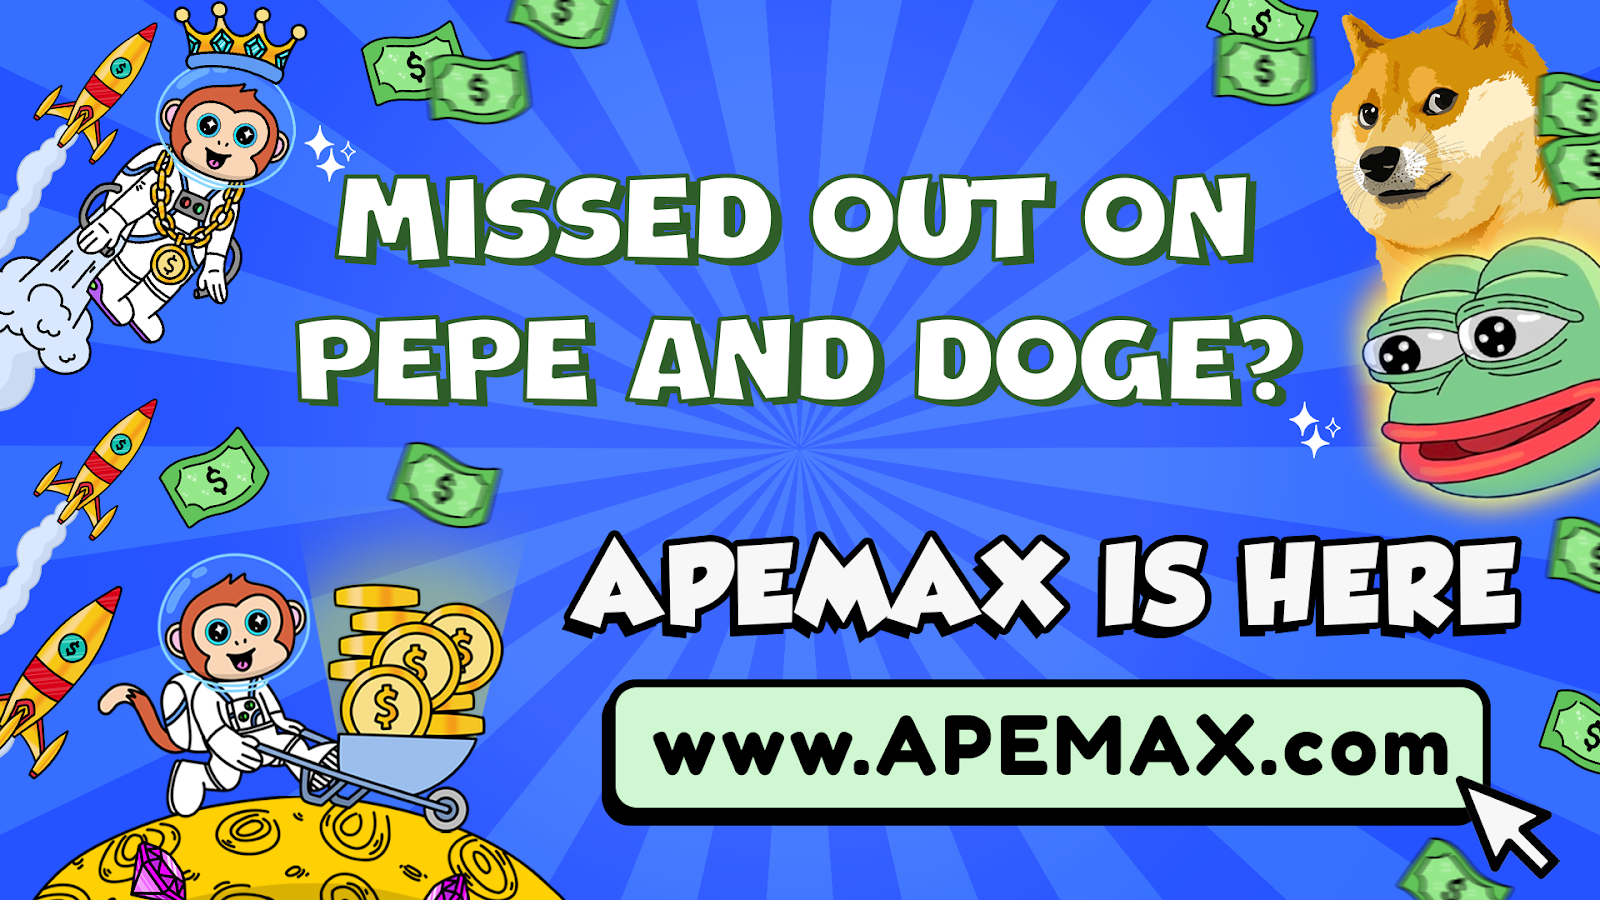 High Growth Coins and new Meme Coins: Looking at Shiba Inu, Pepe Coin, Dogecoin, New Crypto Presale ApeMax